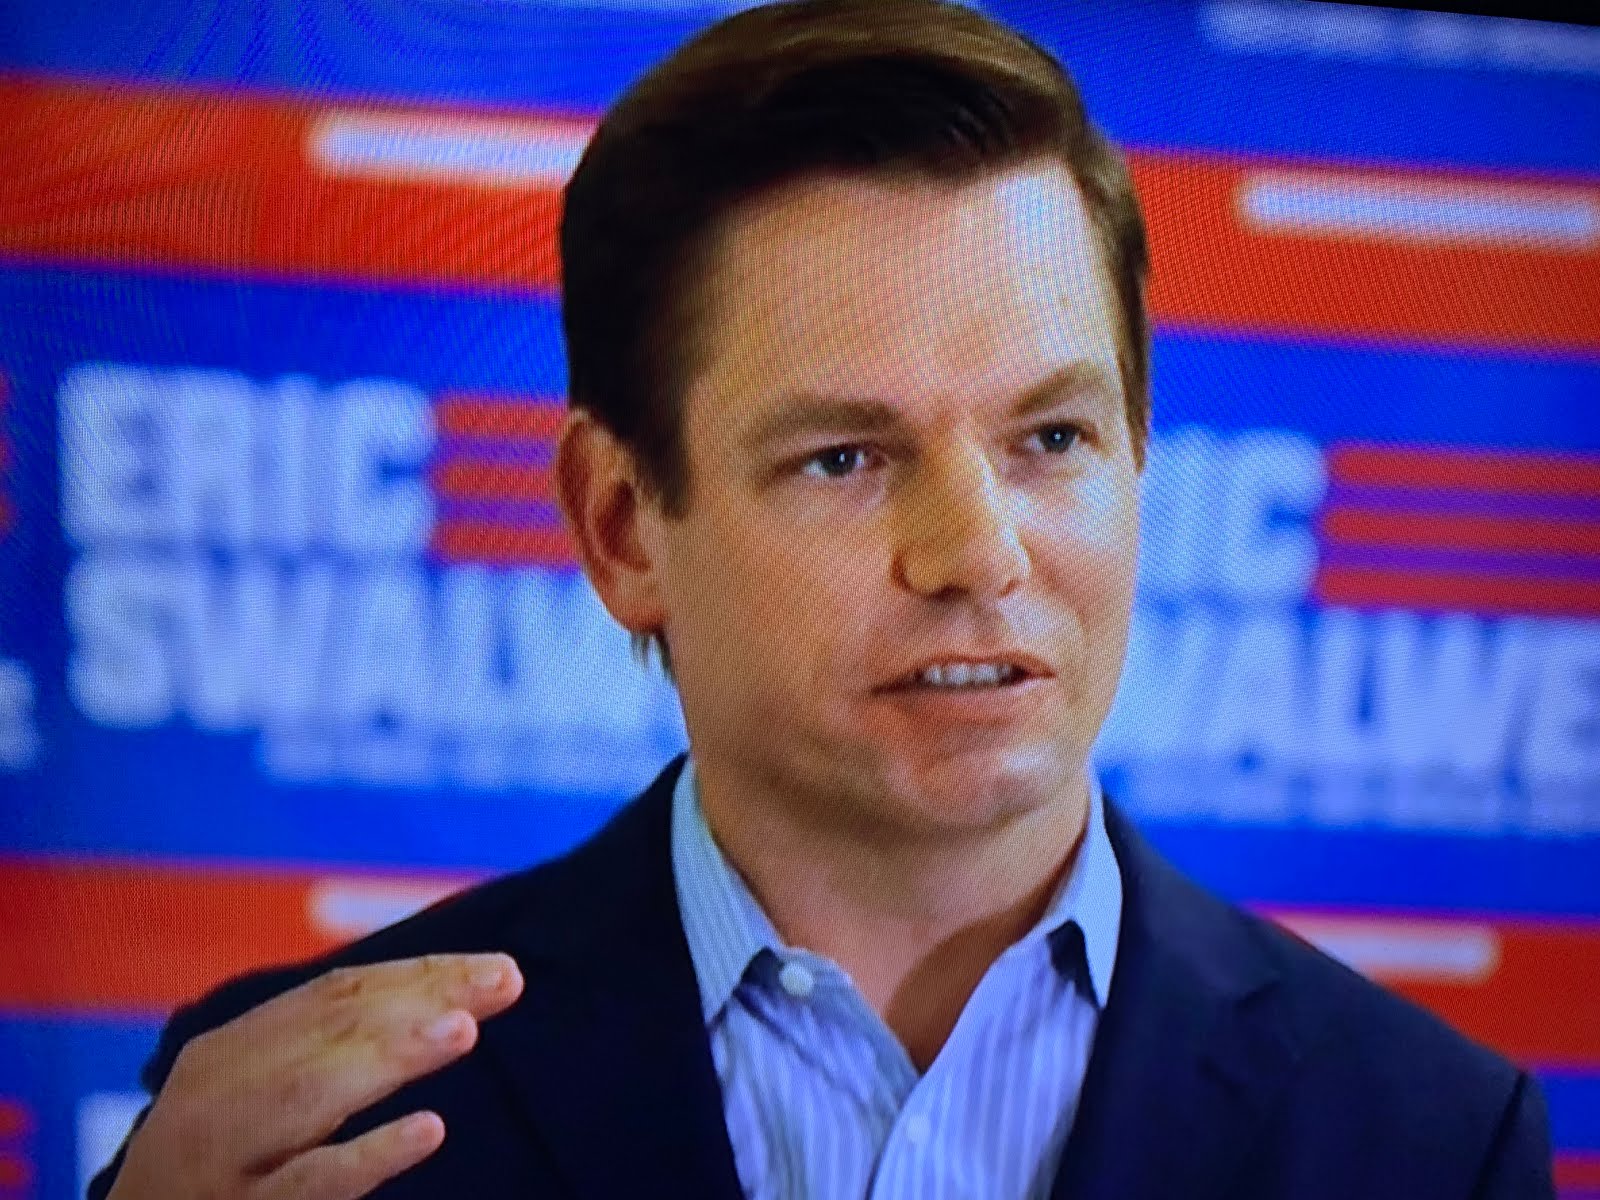 ERIC SWALWELL: DROPS OUT OF PRESIDENTIAL RACE.